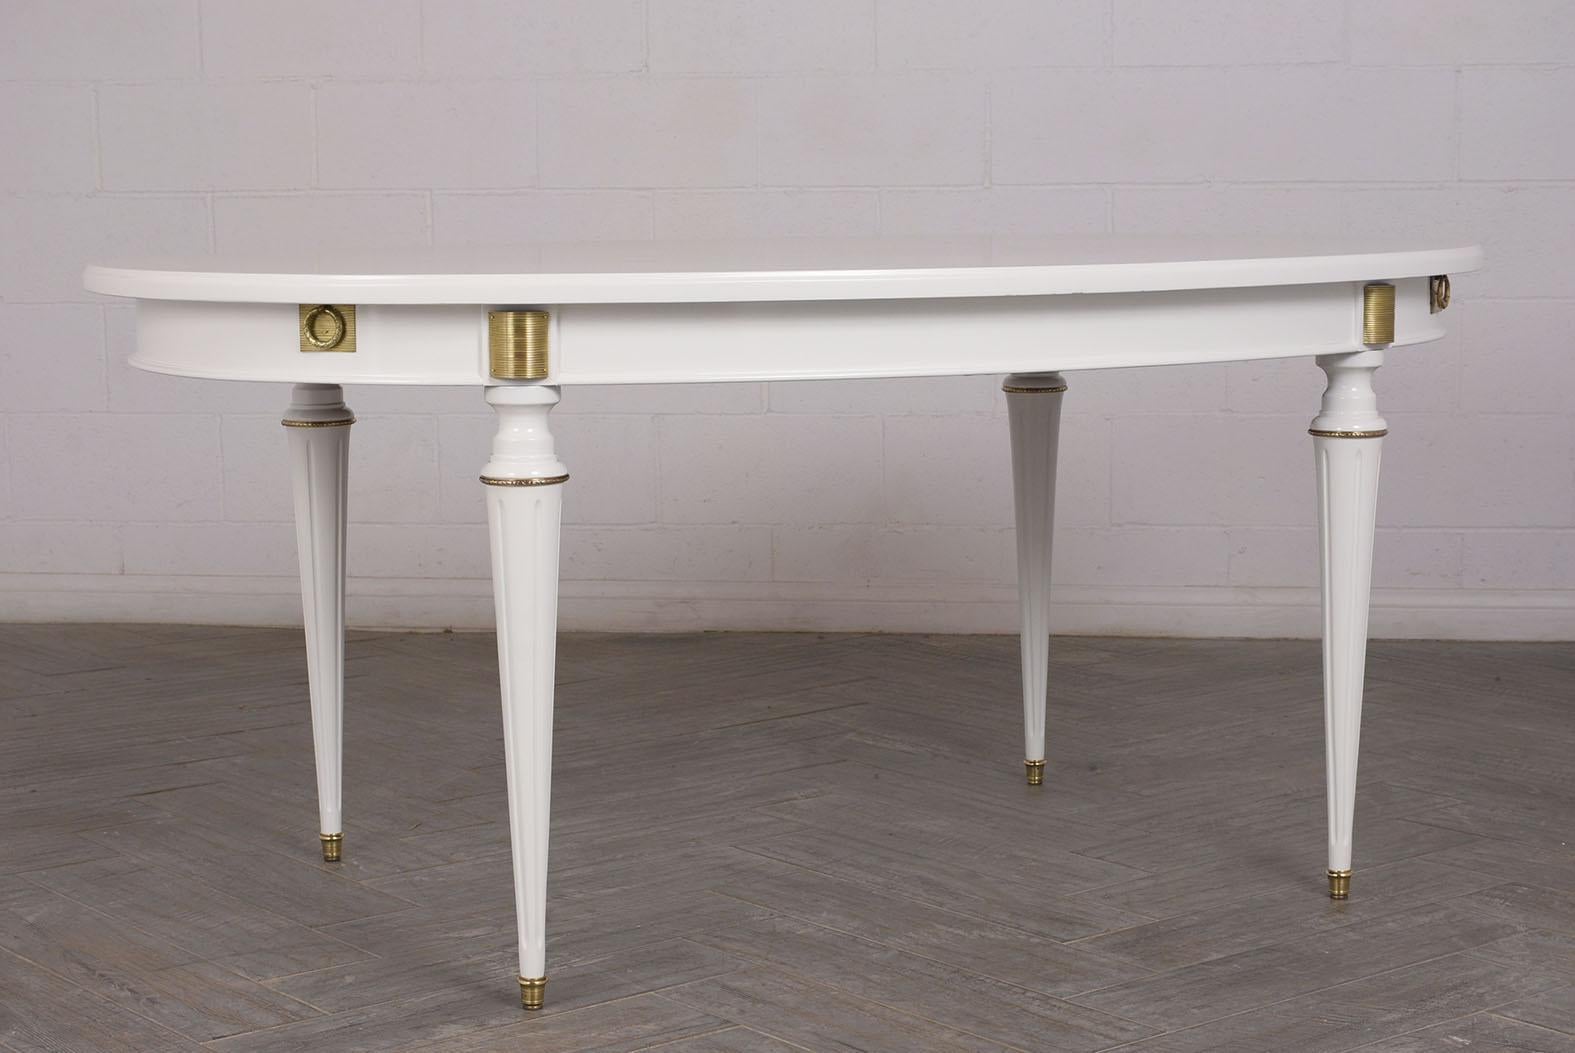 This Louis XVI style oval dining table has a beautiful stained in white color with a lacquered finish. It also features brass moldings and accents around the top and carved legs. The table comes with two extra leaves. The table is in great condition